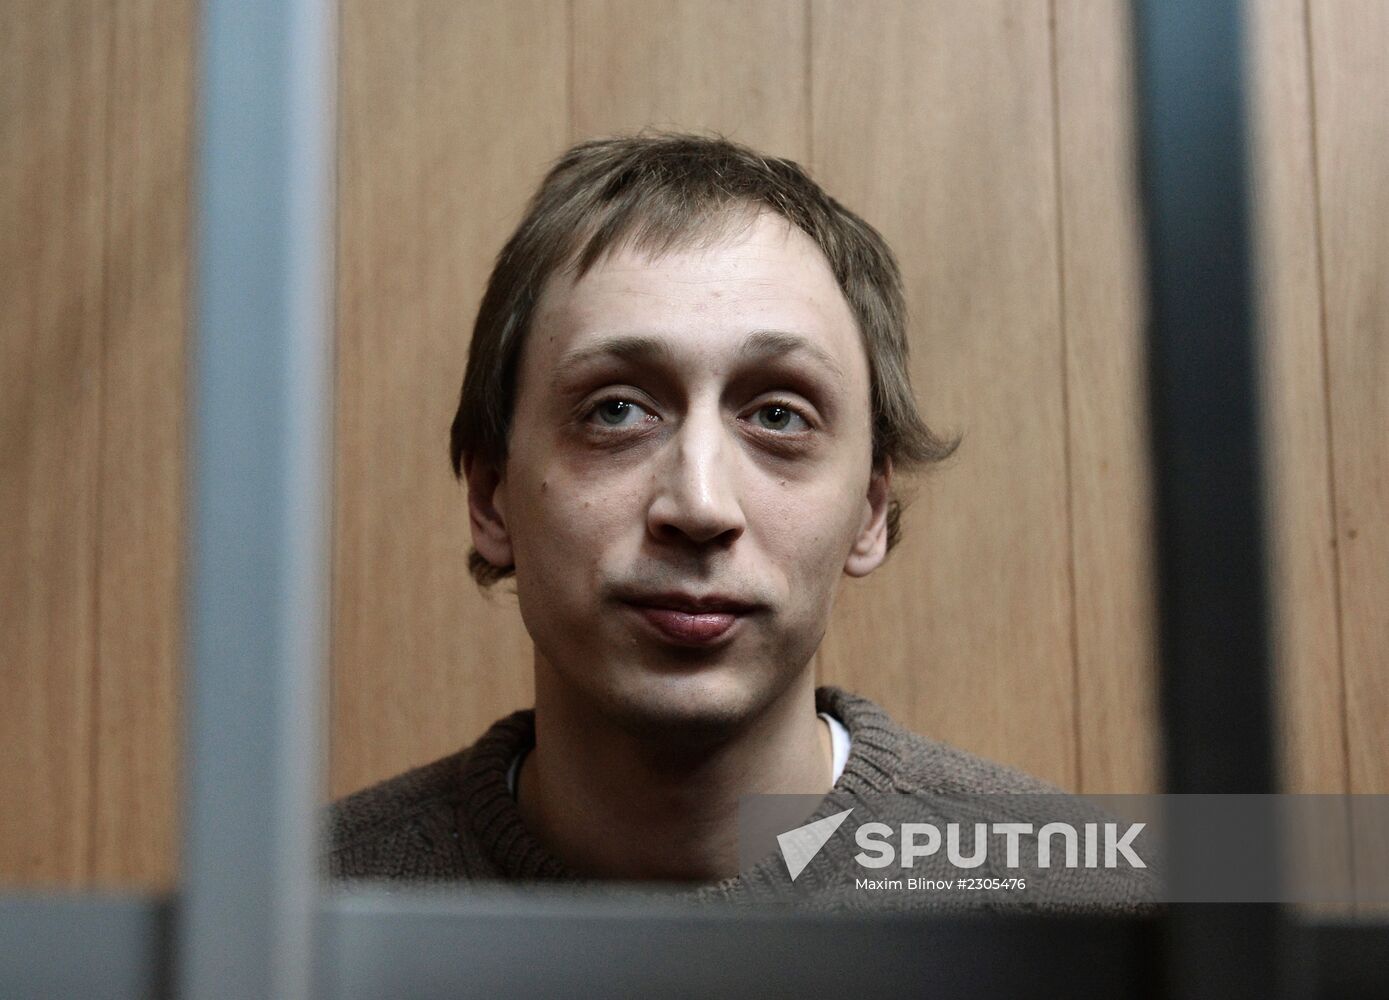 Court considers merits of case on the attack against Sergei Filin